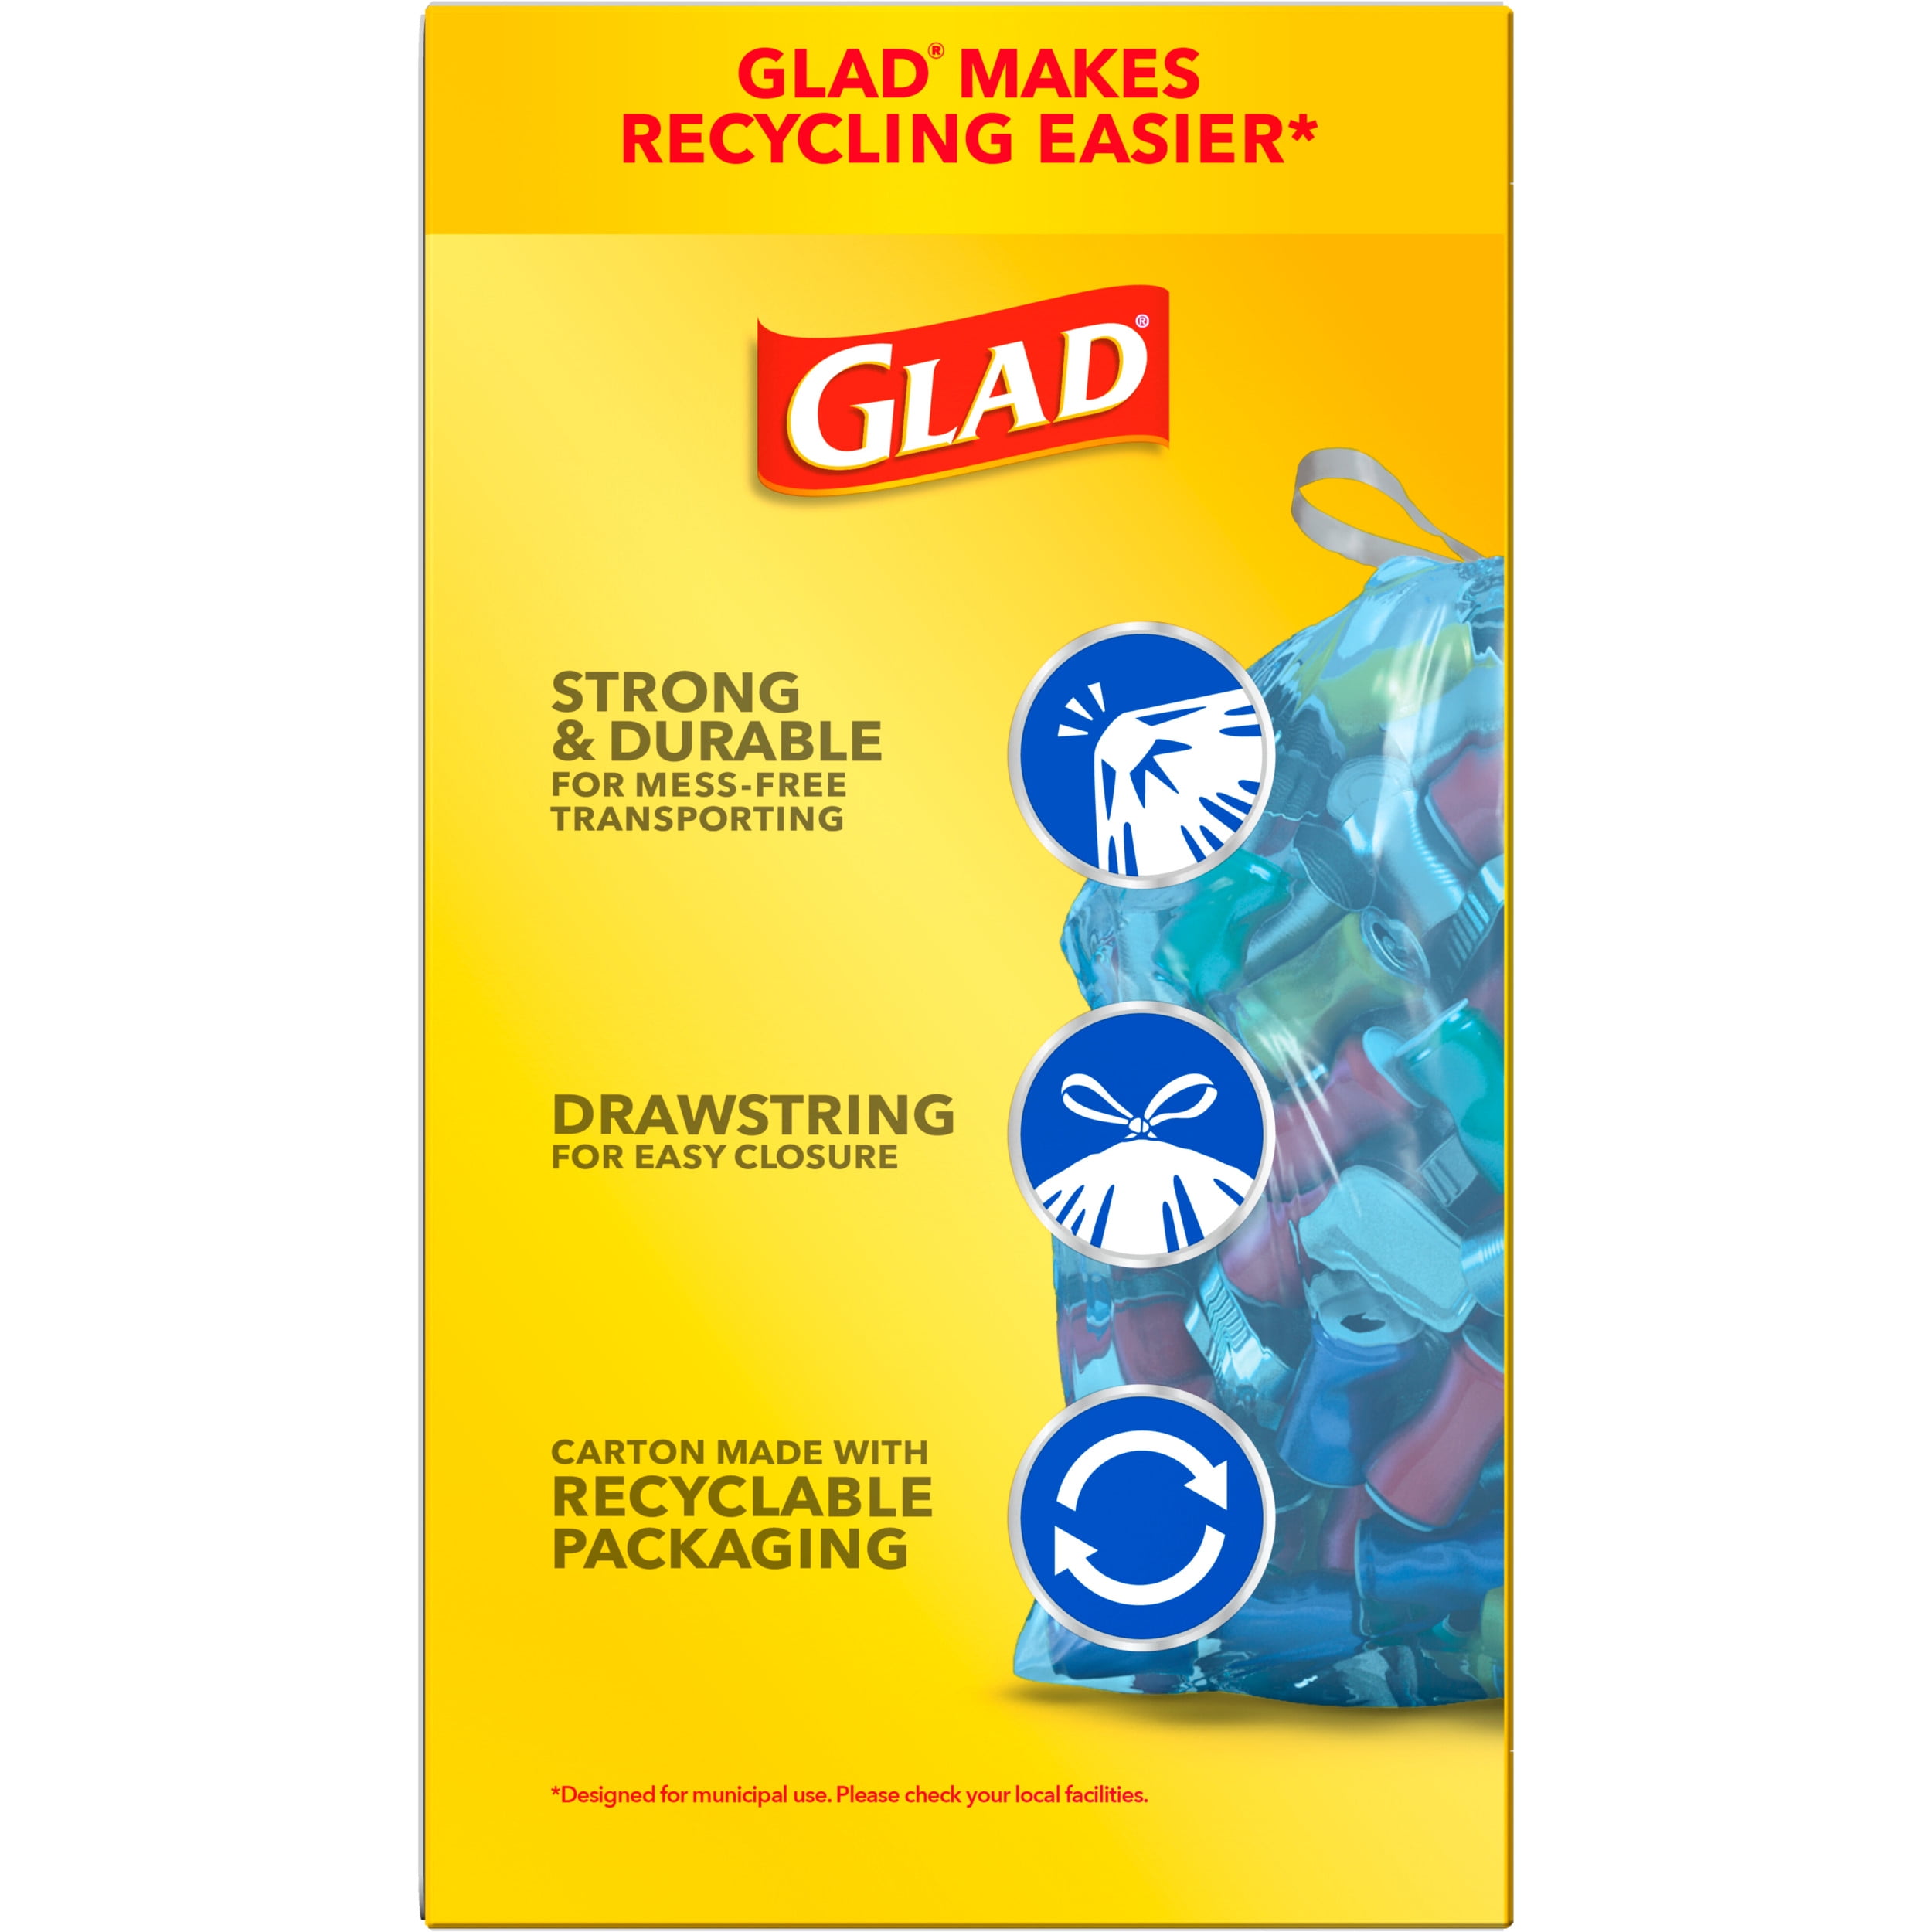 Glad Tall Kitchen Drawstring Blue Recycle Bags, 45 ct / 13 gal - Kroger